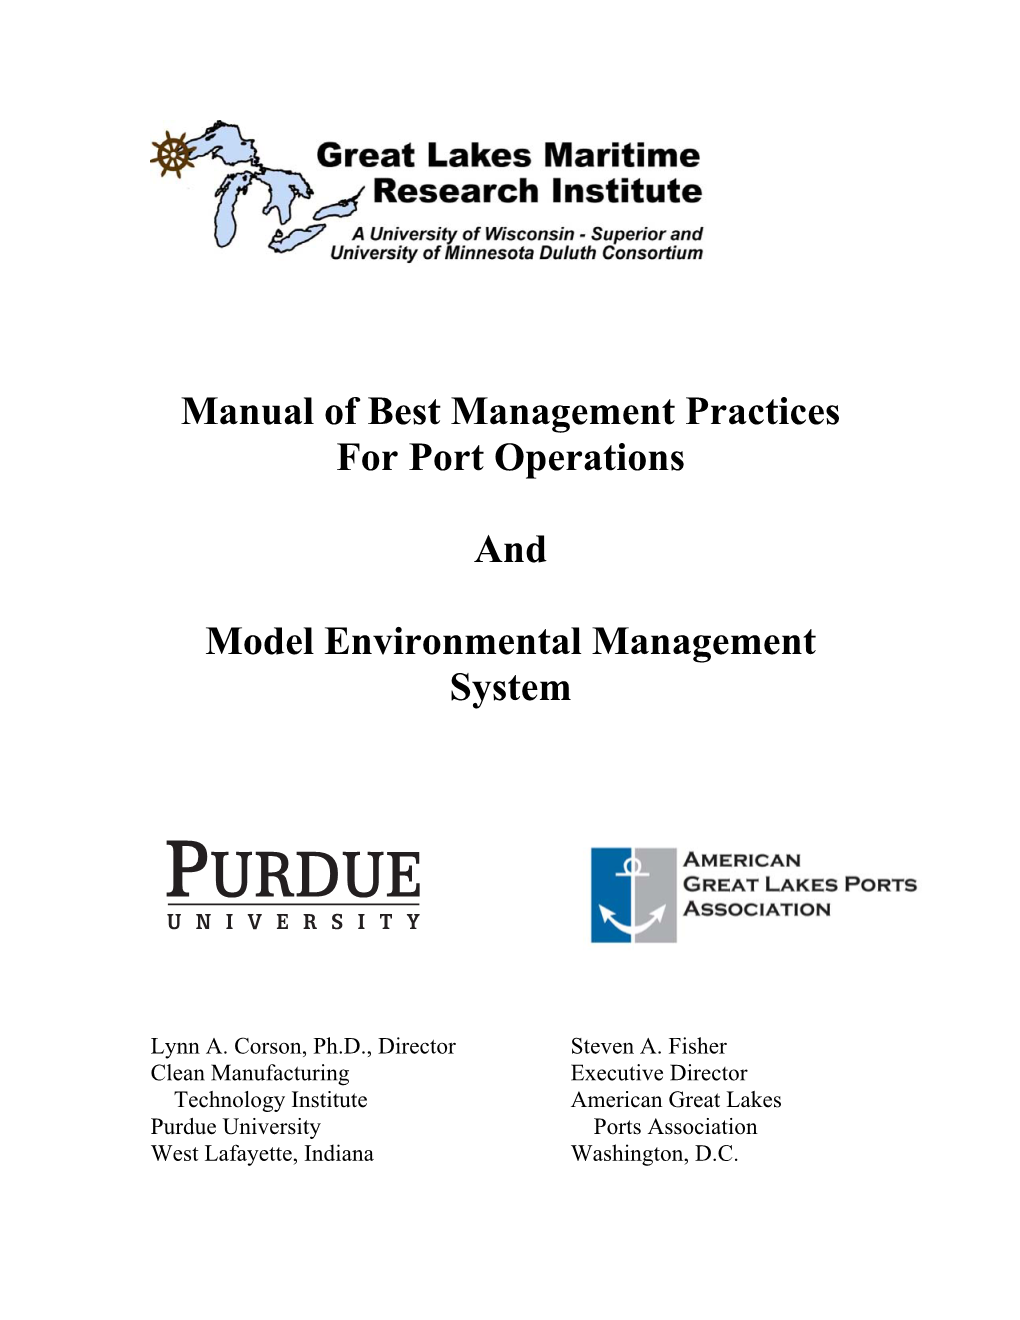 Manual of Best Management Practices for Port Operations and Model